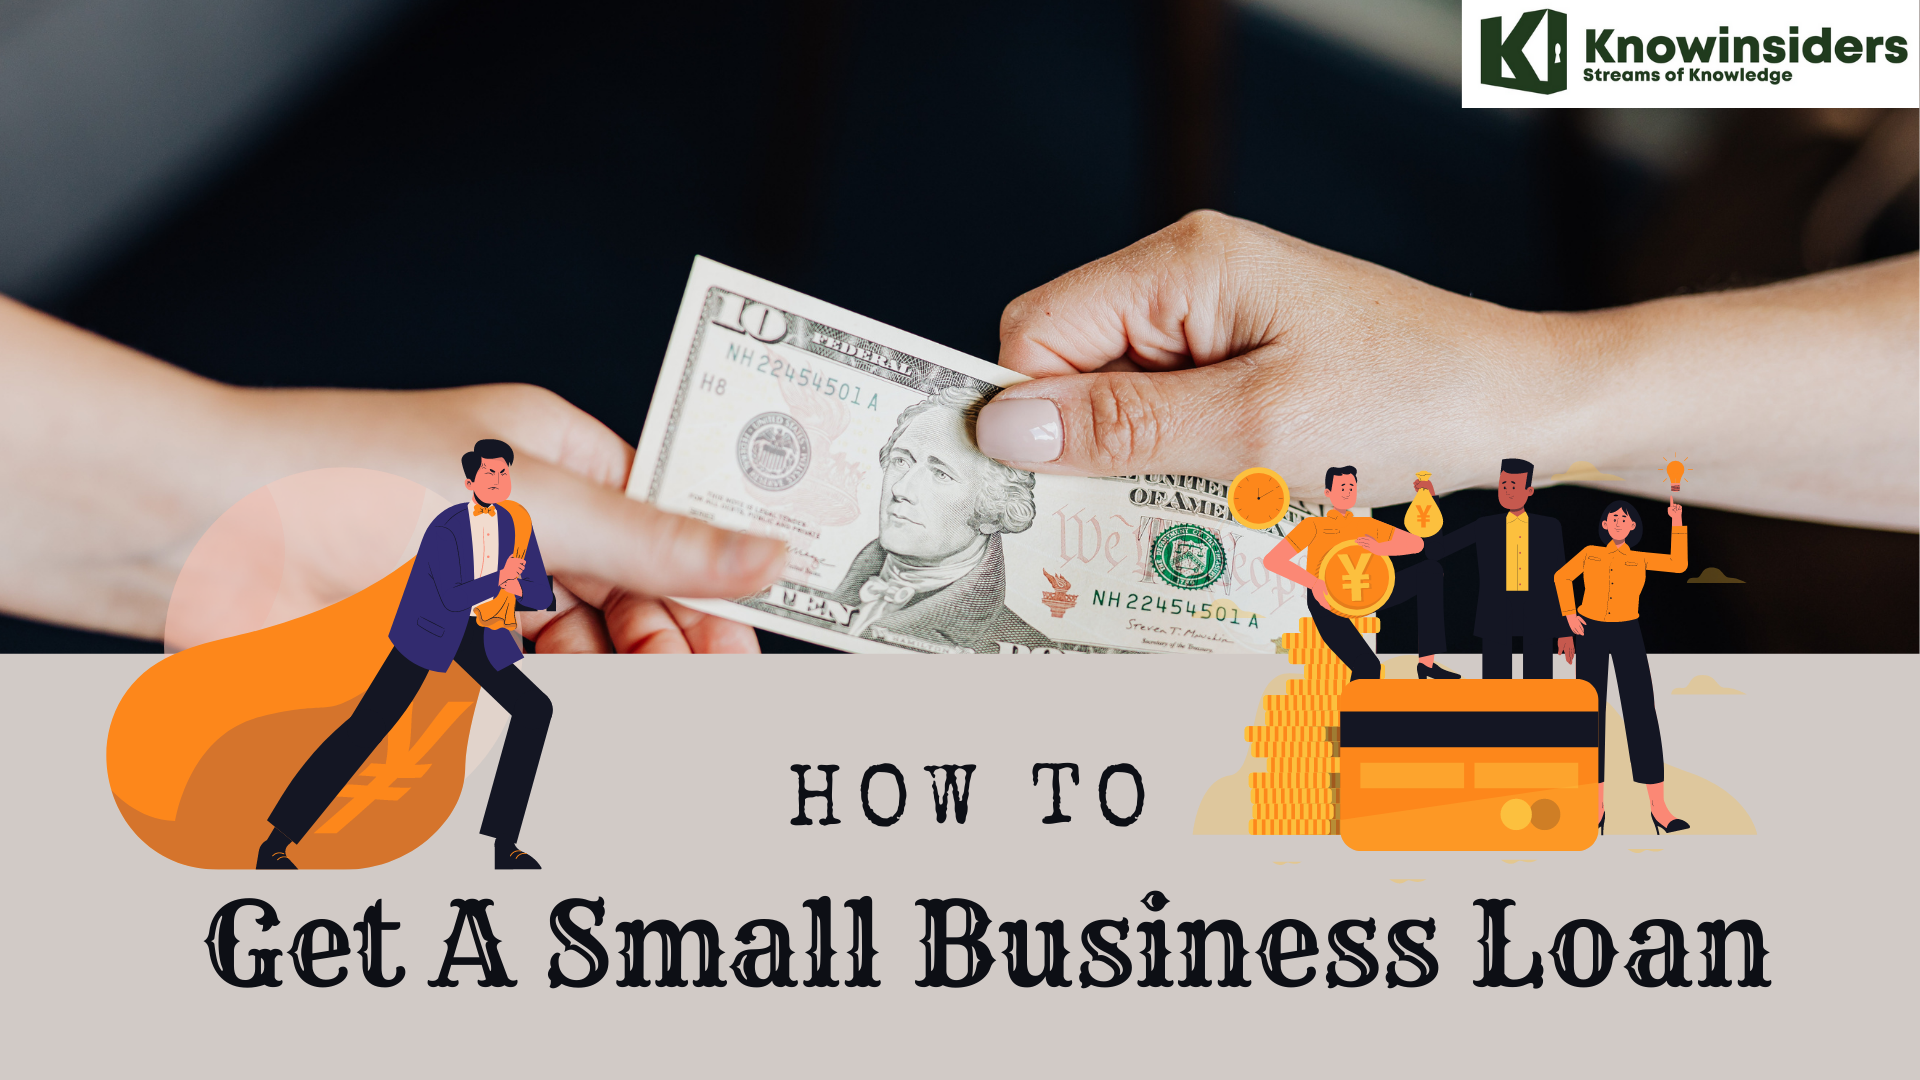 The Best Tips To Get A Small Business Loan for Startup Success